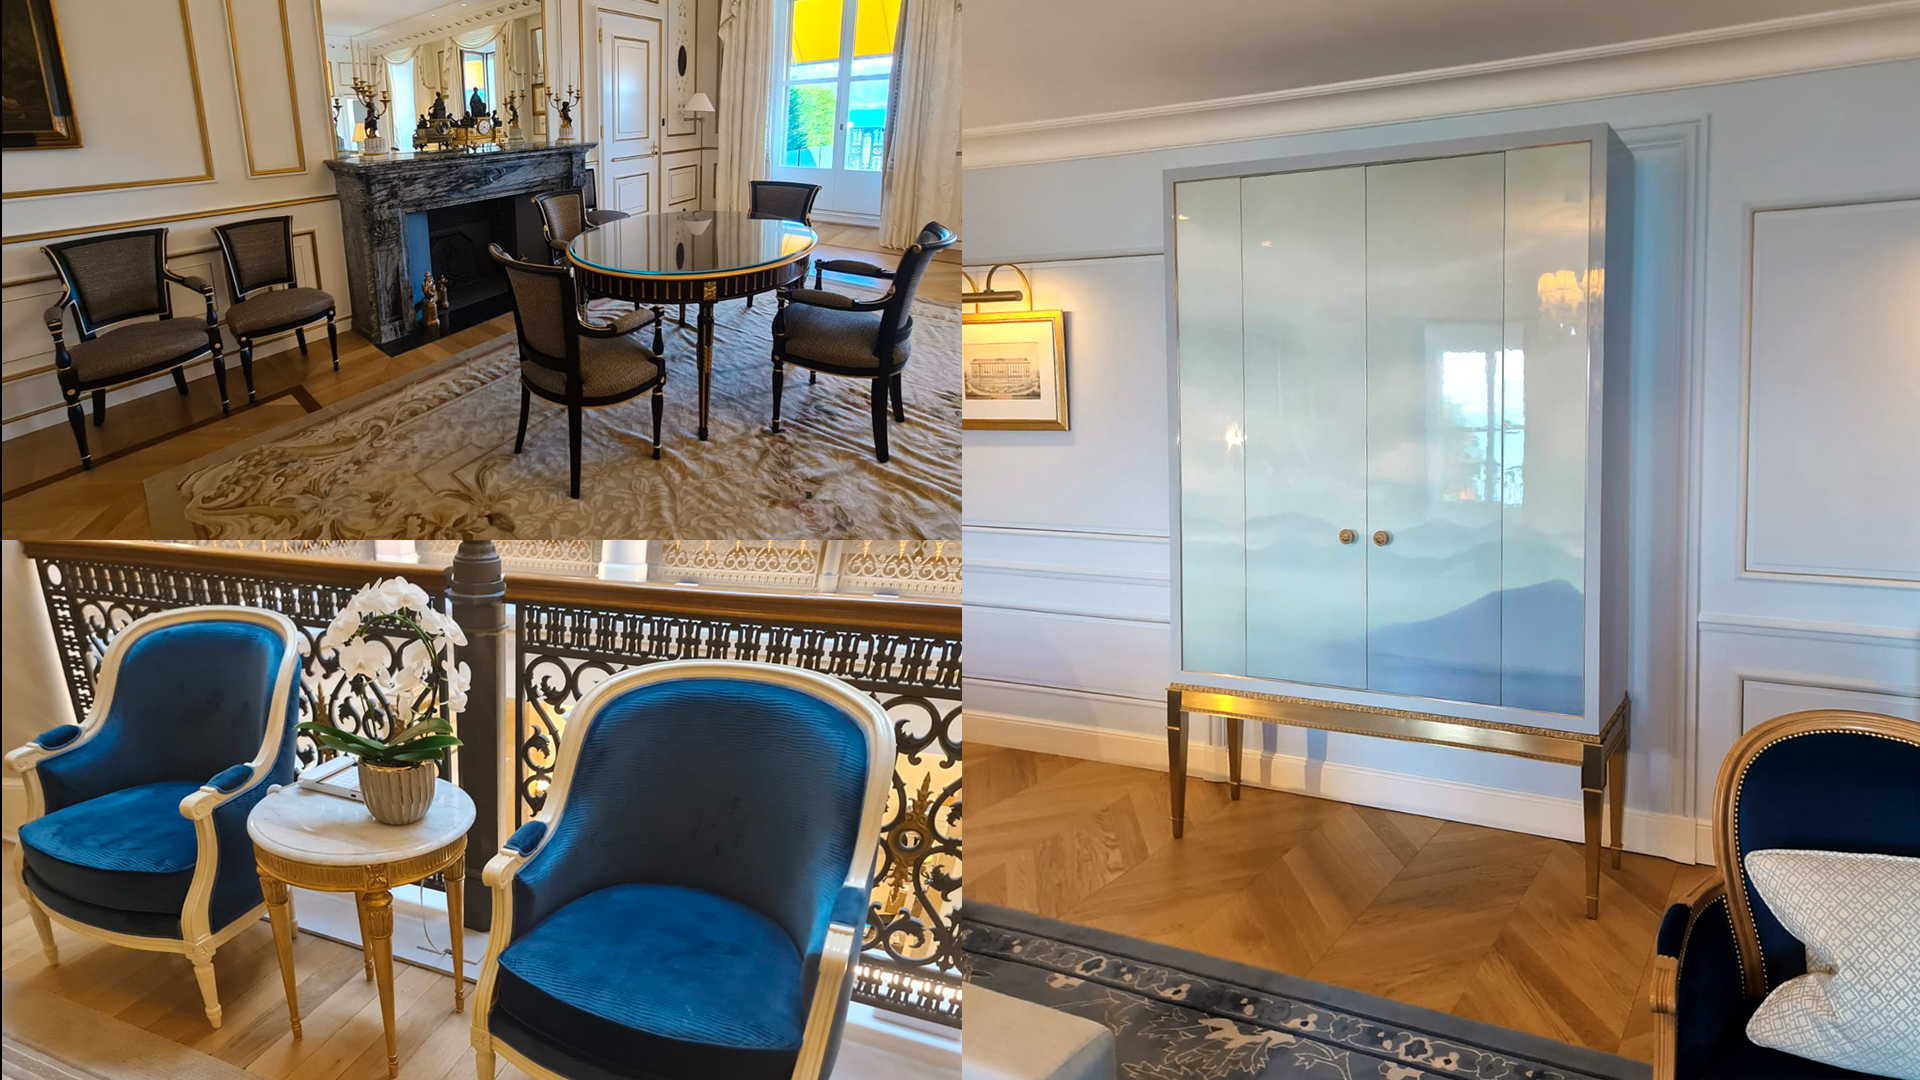 The unique finishes used in some furniture pieces make the Beau Rivage Palace an unforgettable experience for its guests.